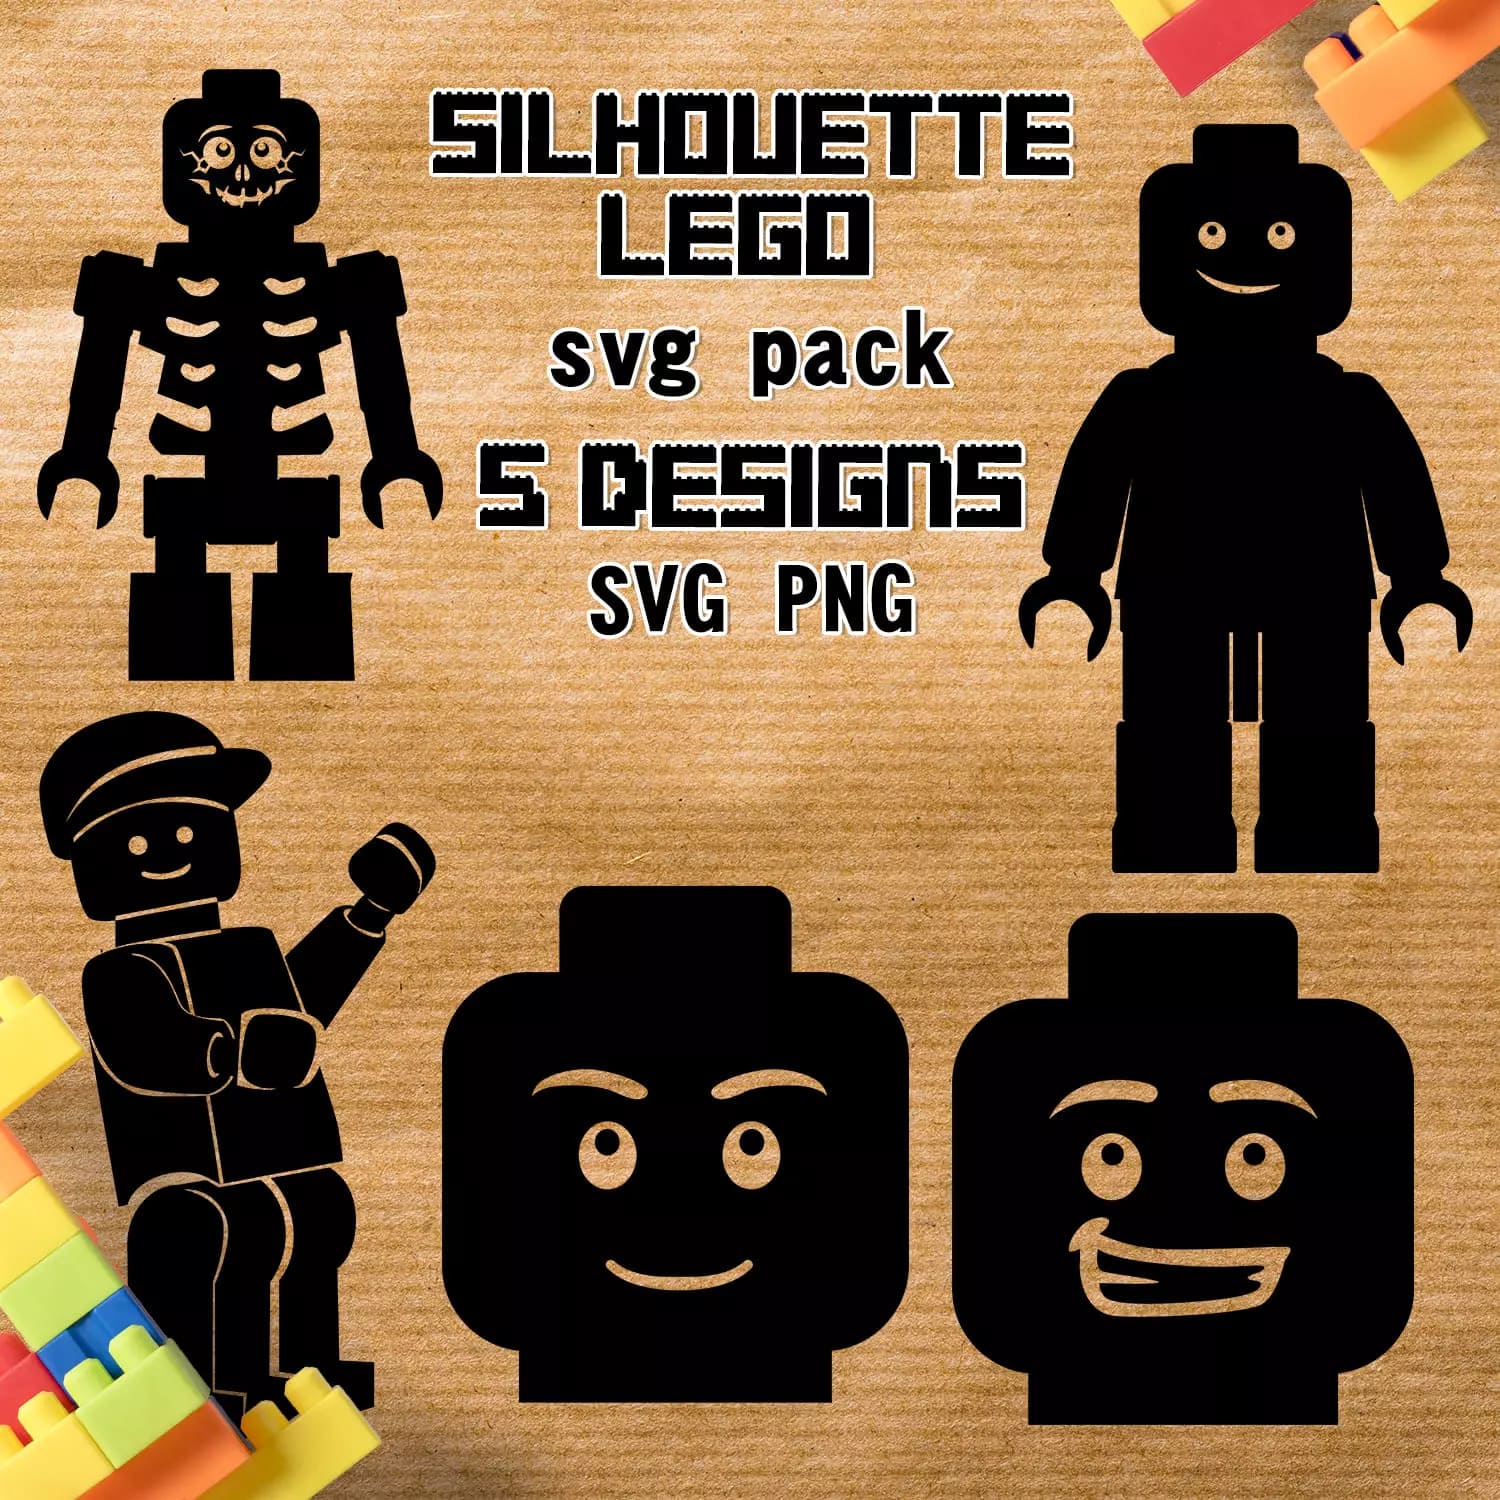 Silhouette Lego SVG Preview.